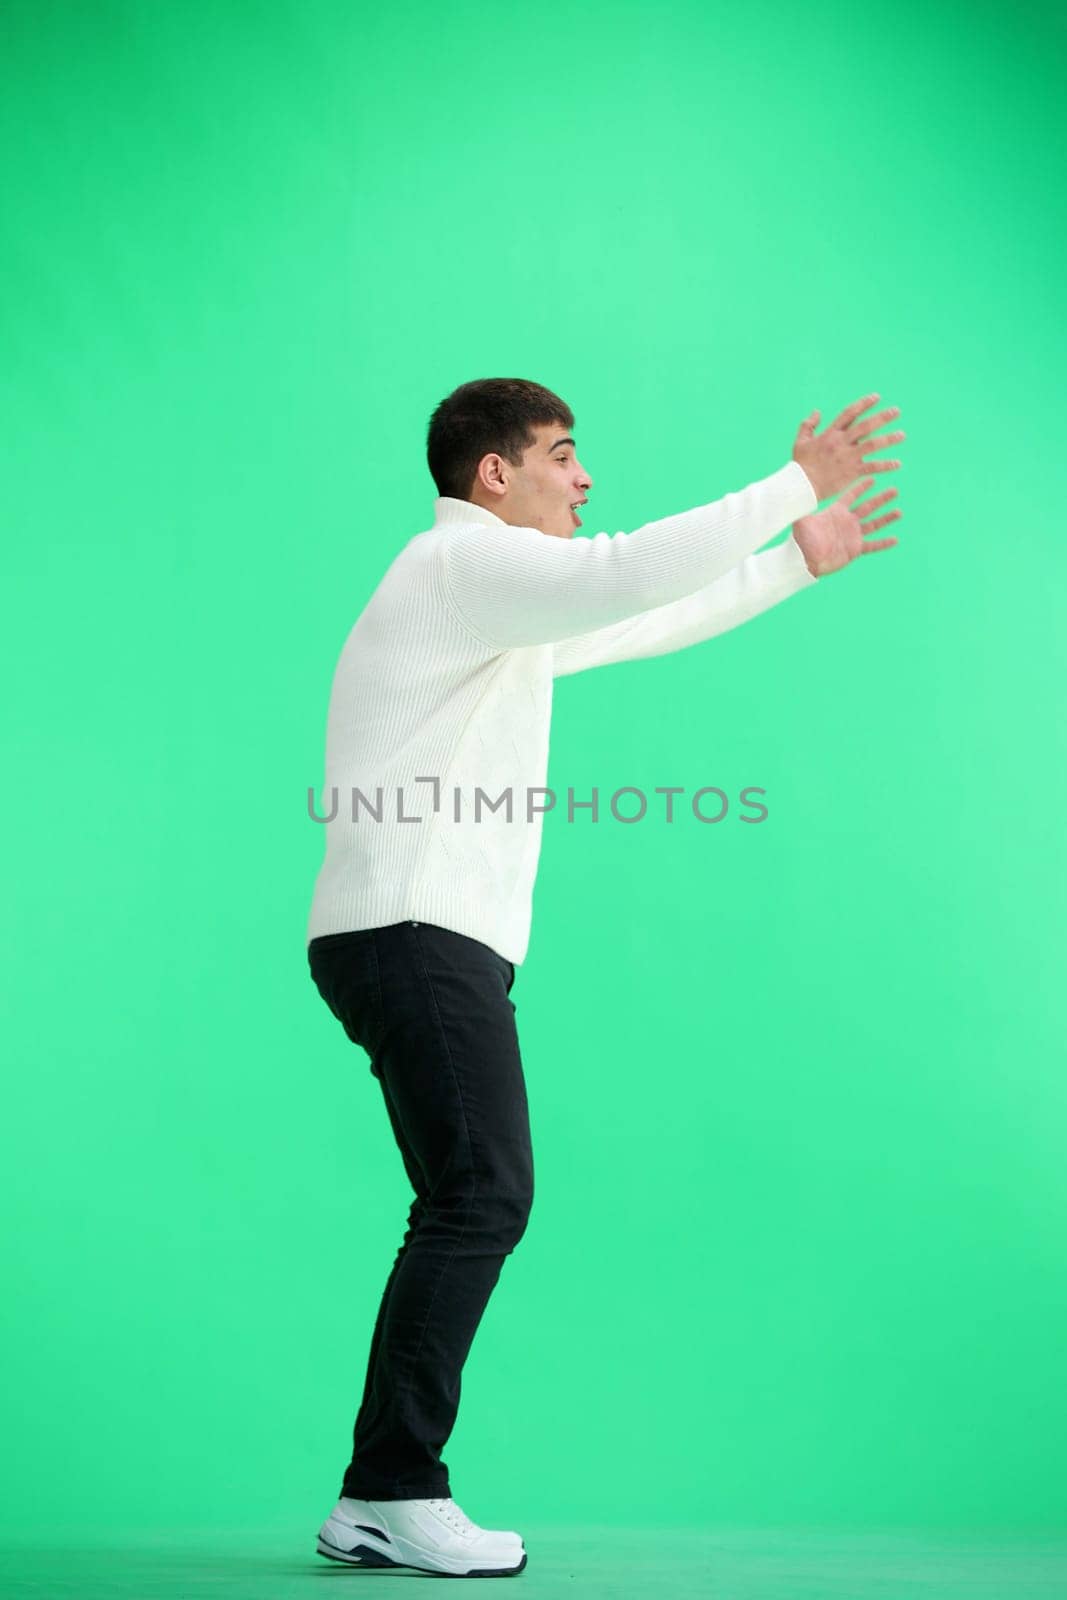 A man, full-length, on a green background, spreads his arms.